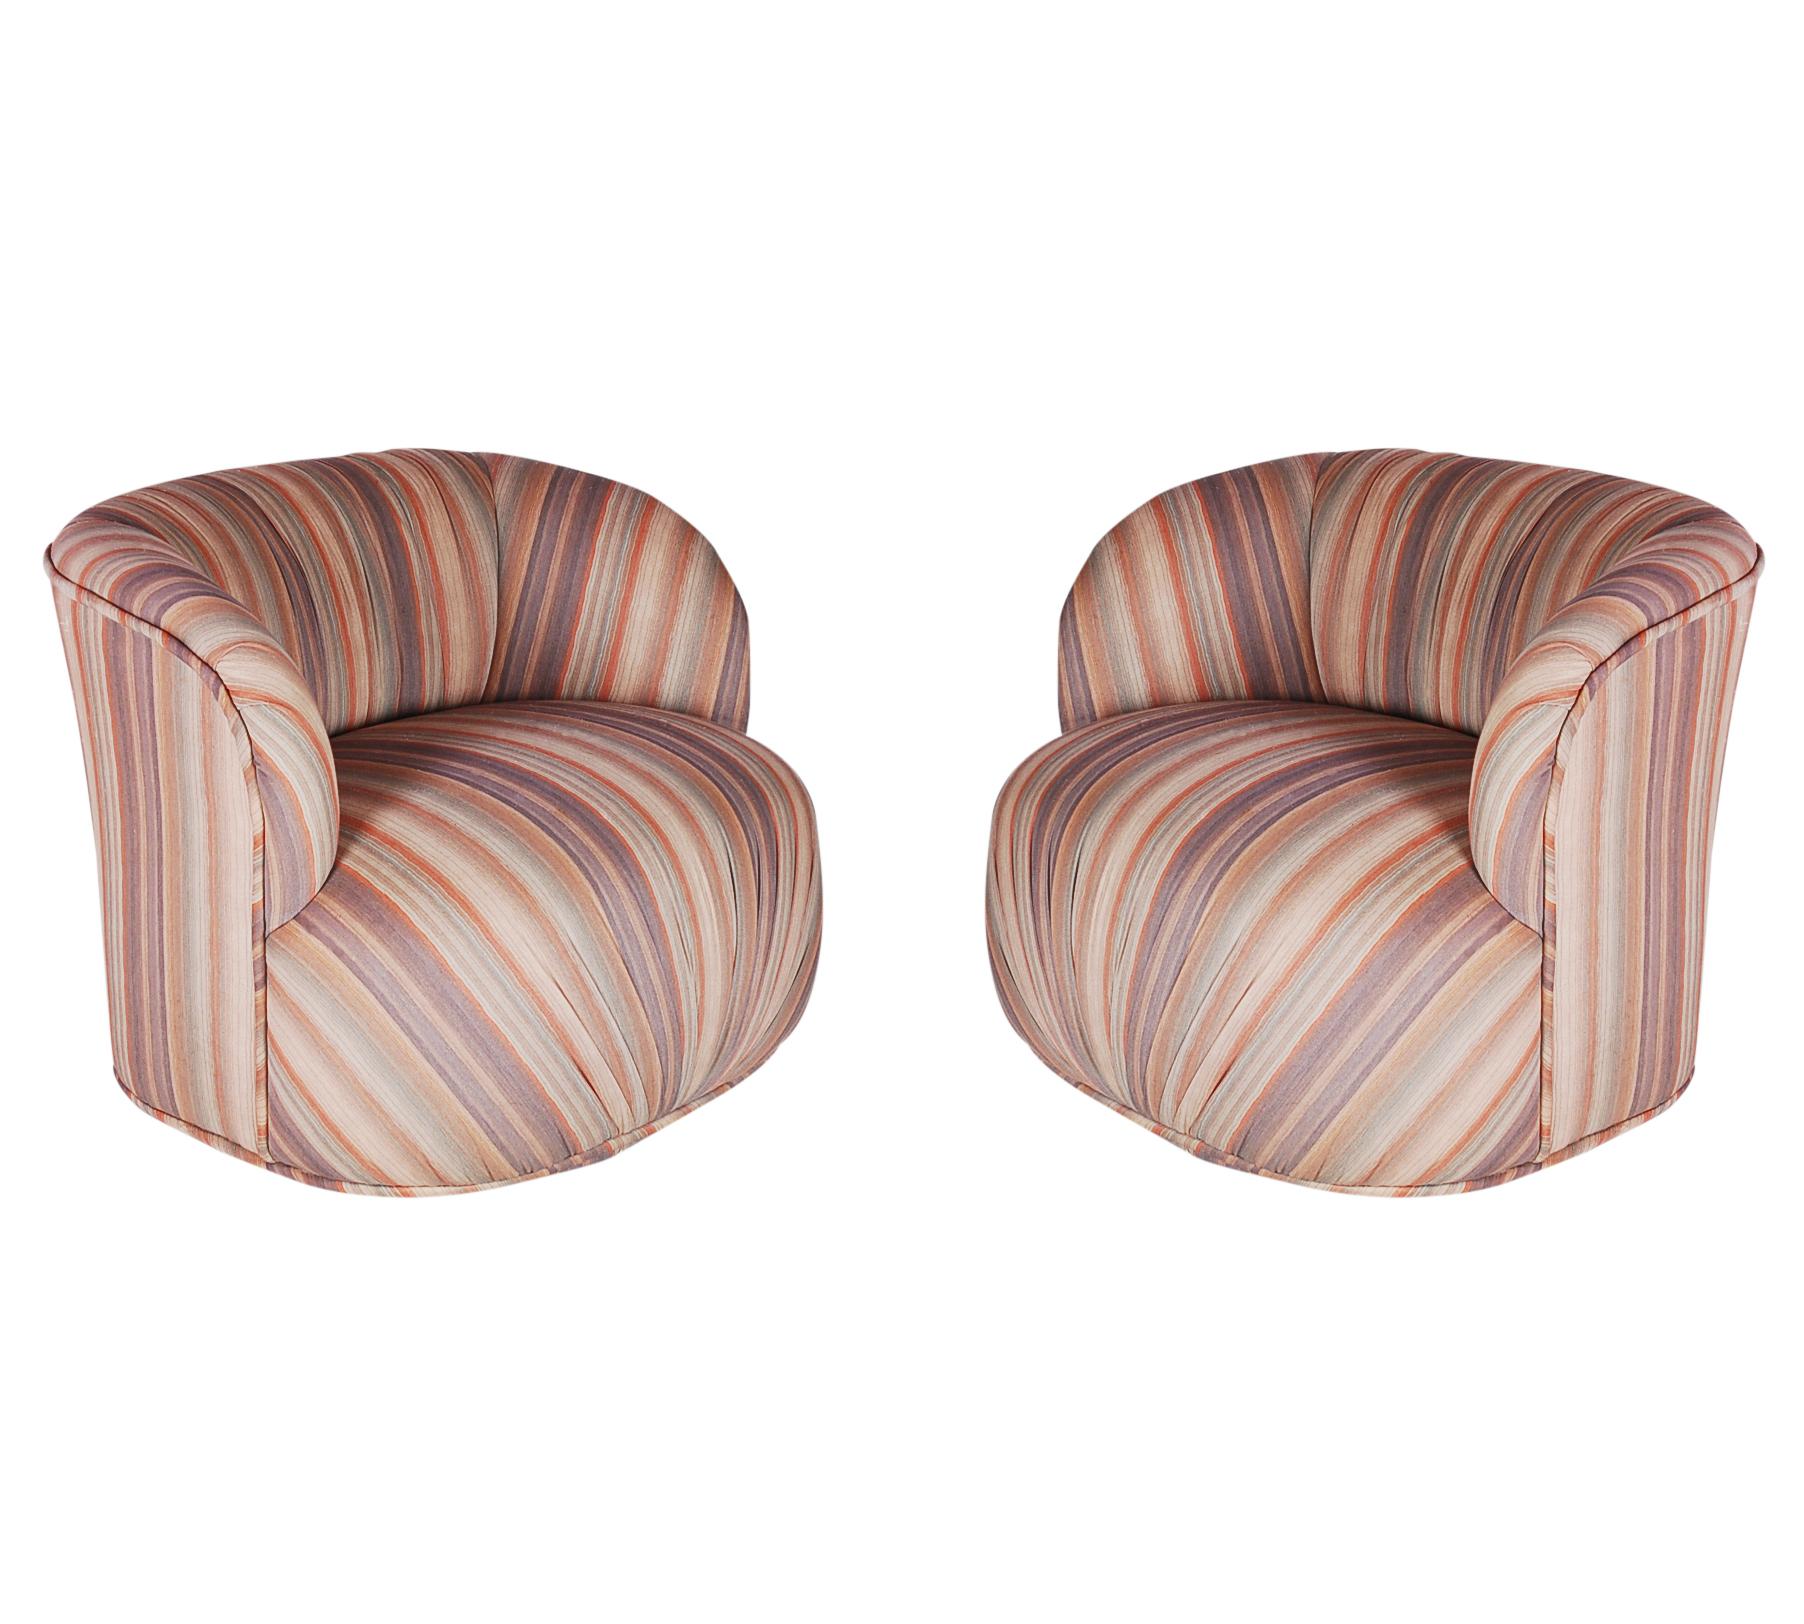 A matching pair of bubble / pouf form lounge chairs. Both are in original fabric and need recovering. Foam, padding and swivel mechanisms are fine. We offer upholstery services.